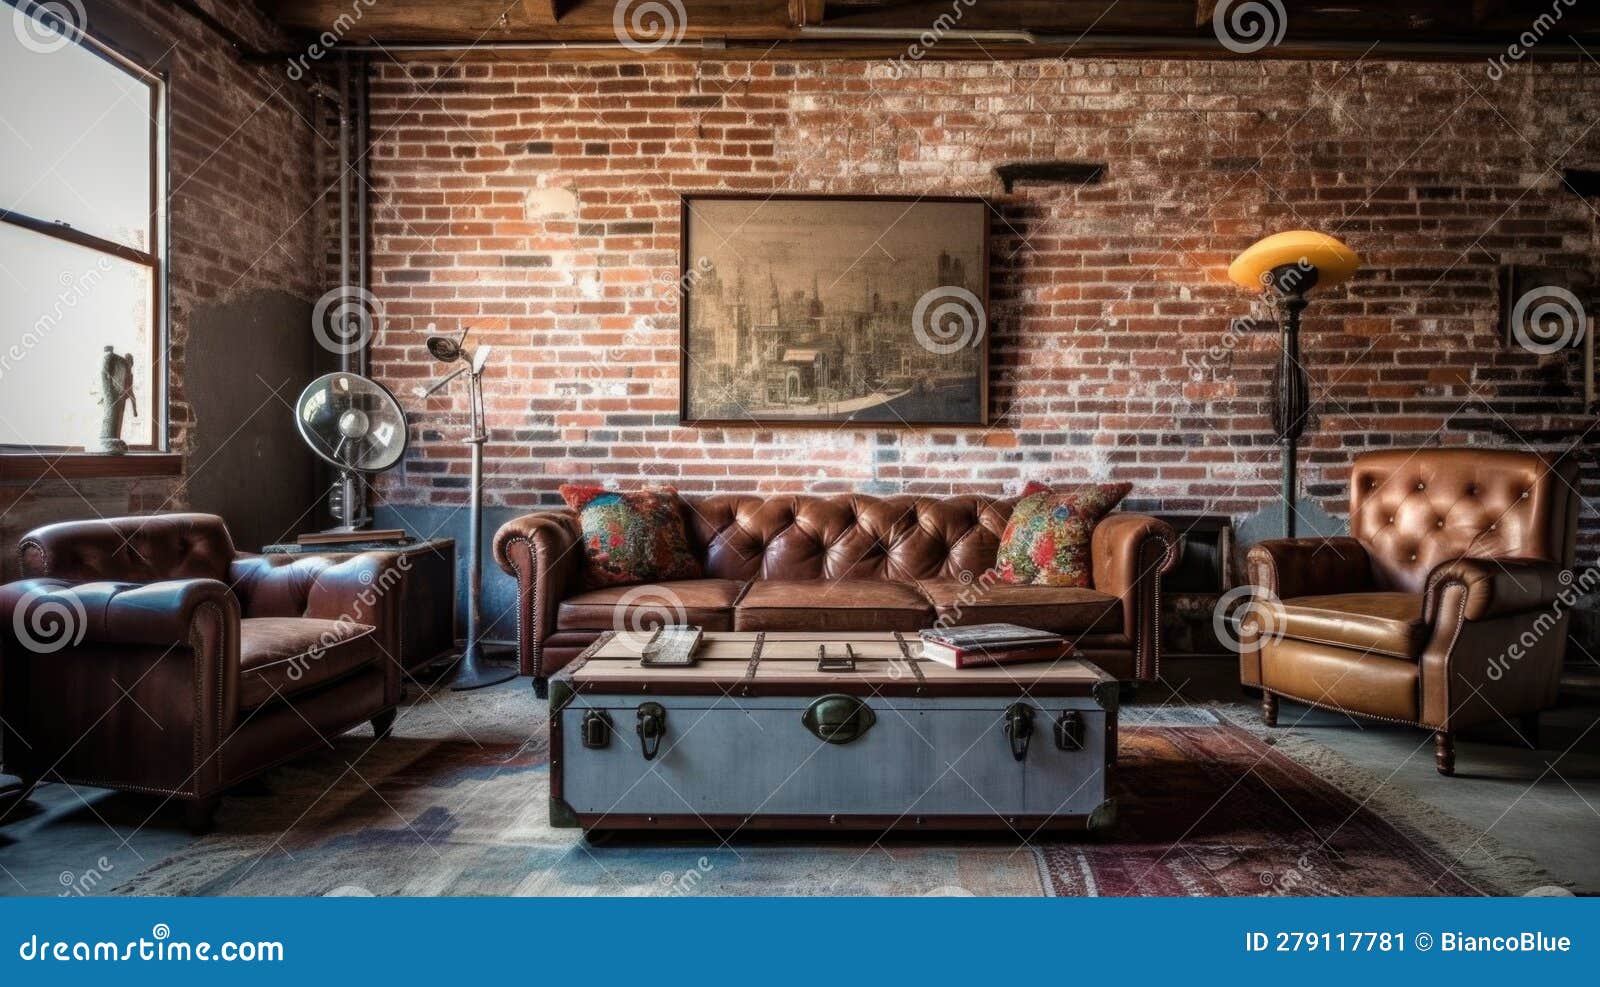 Living Room Decor, Home Interior Design . Industrial Rustic Style ...